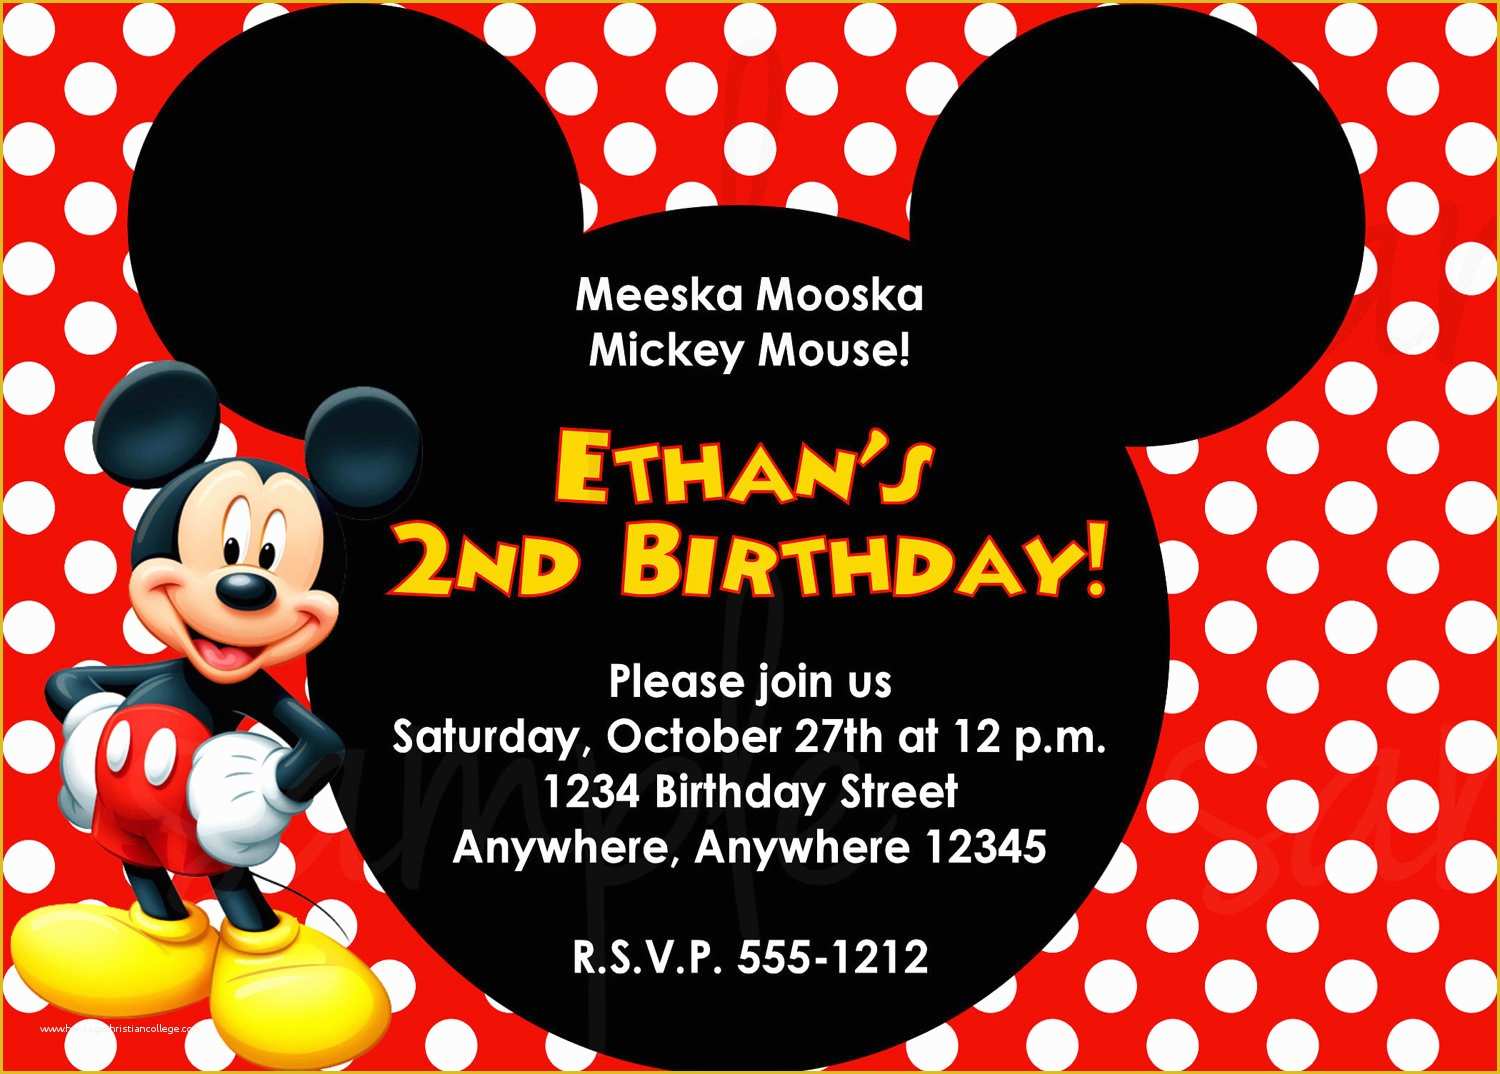 Mickey Mouse Invitation Template Free Download Of Mickey Mouse Birthday Invitation